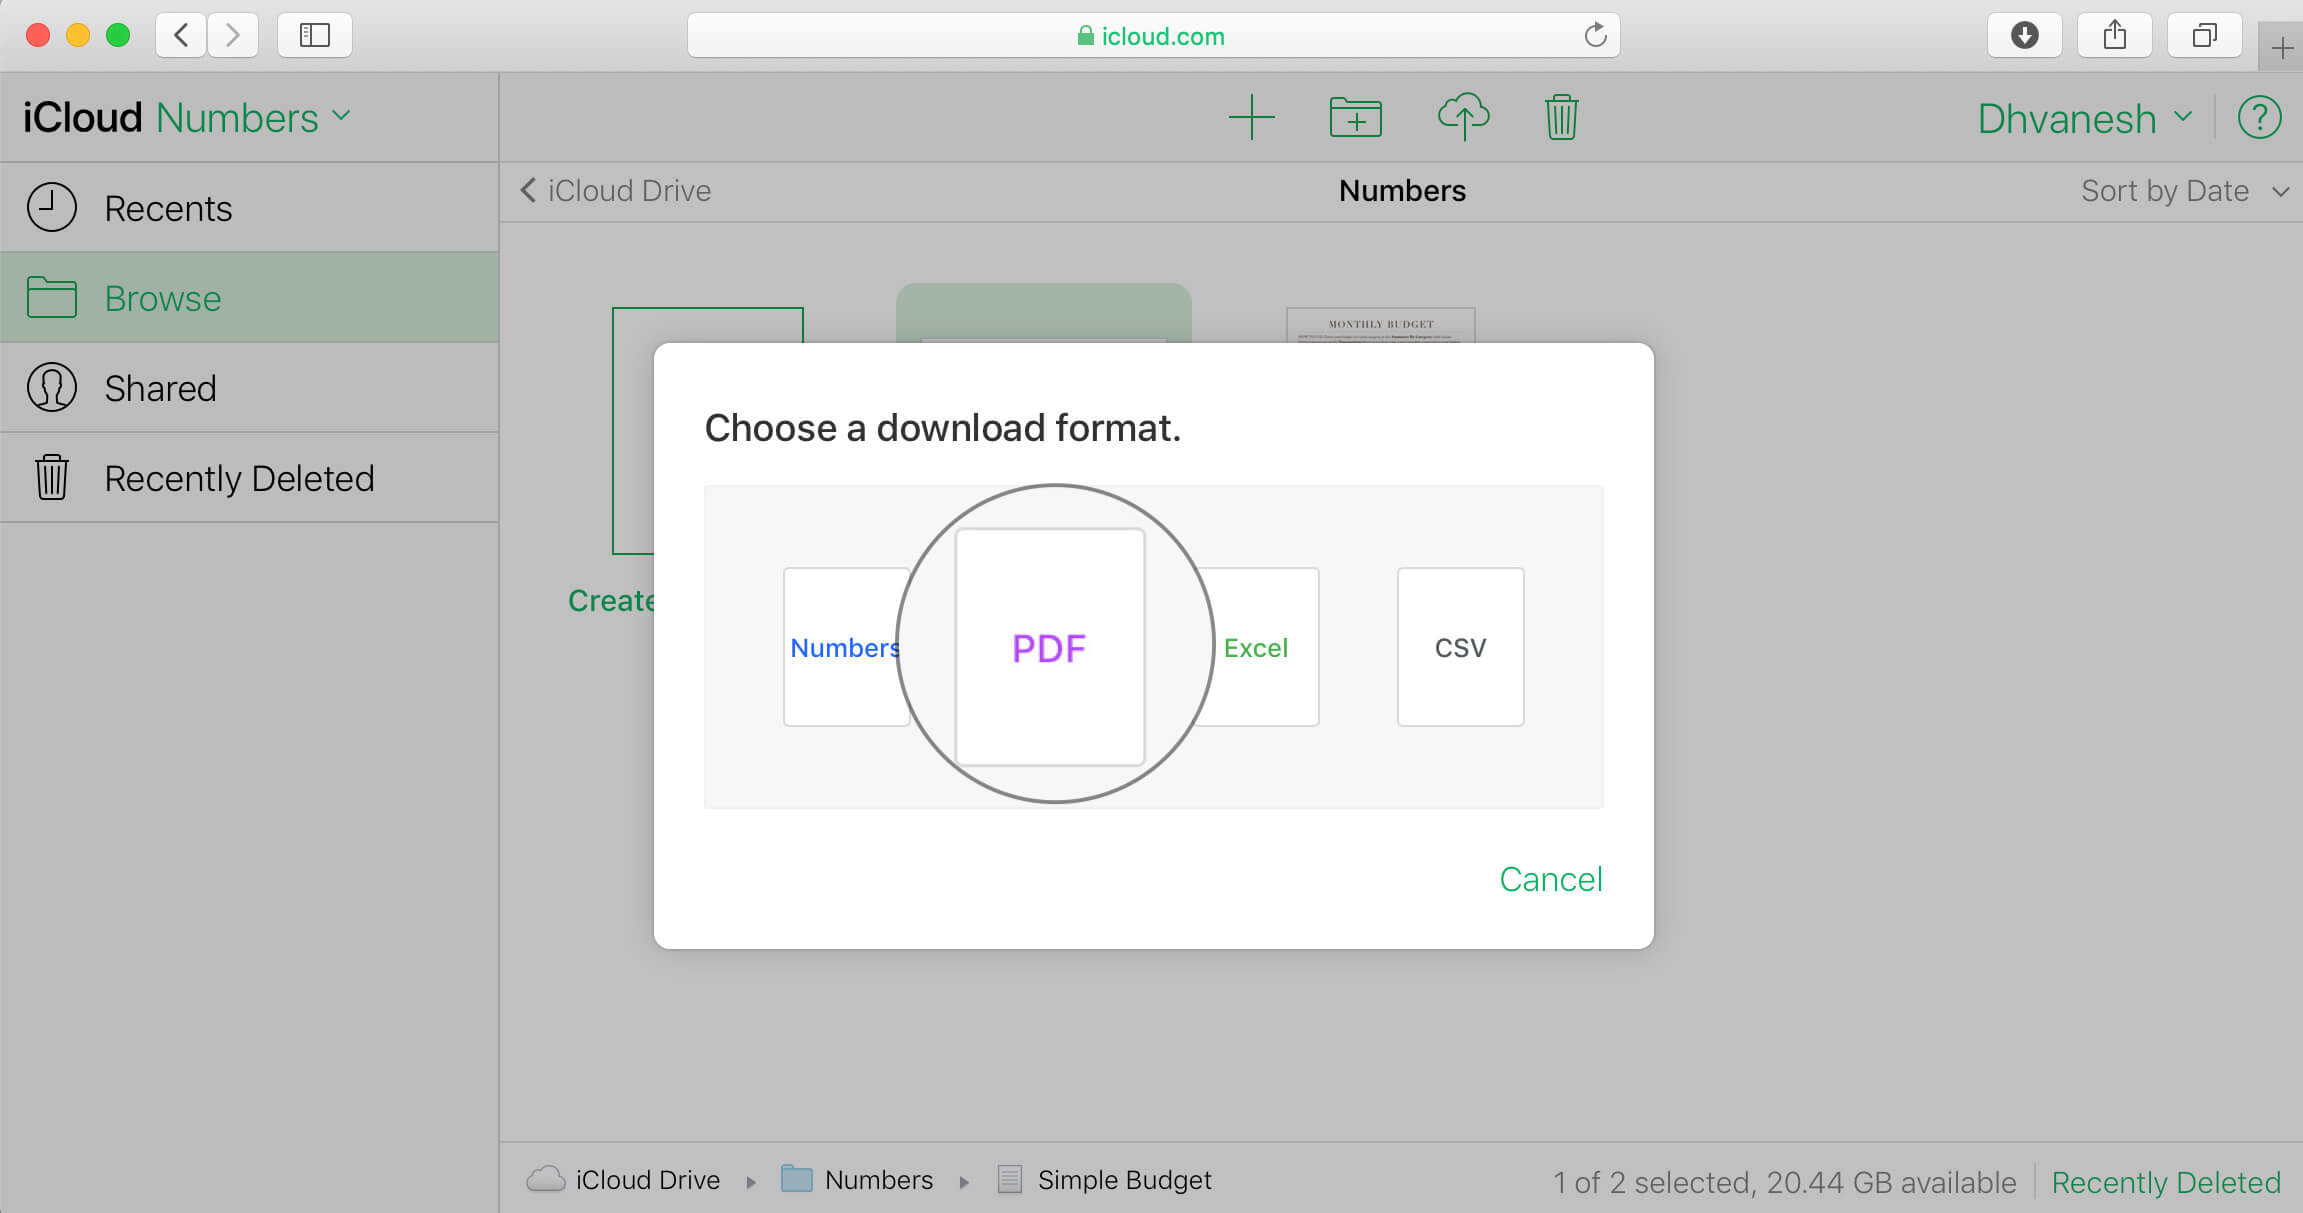 Select the File format you wish to Export from iCloud